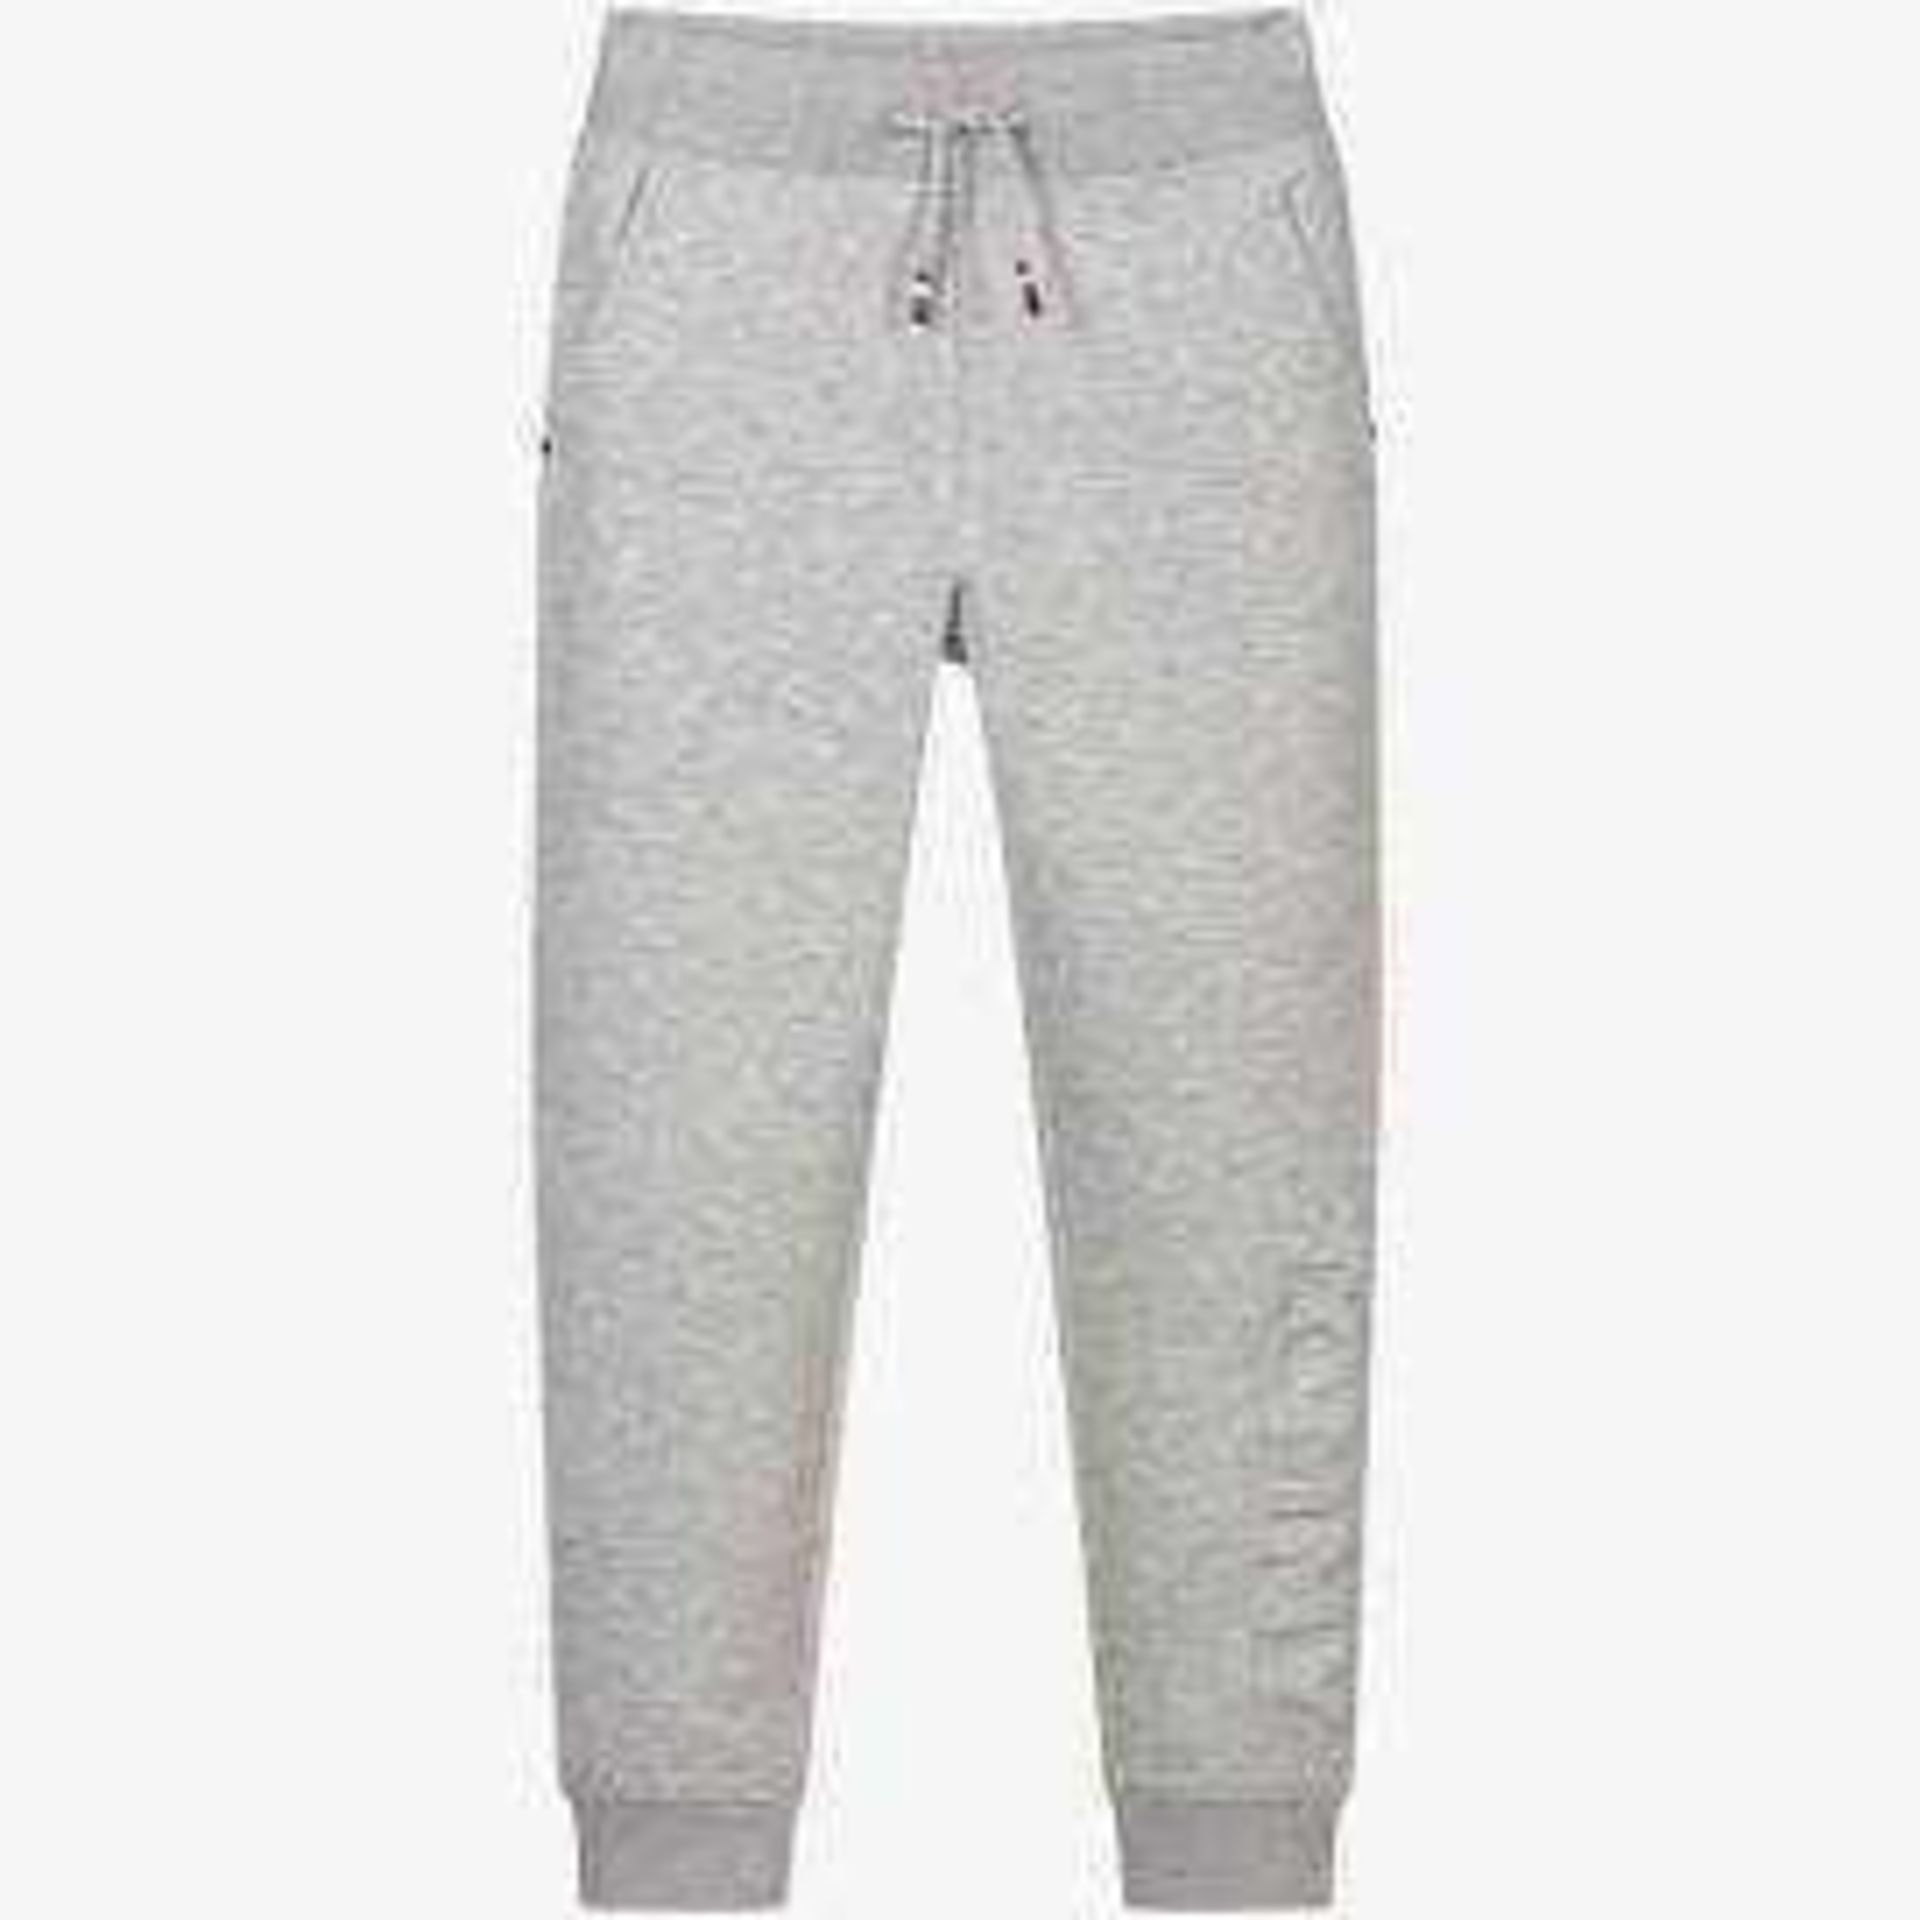 *RRP £115 Lot To Contain 3 Brand New Pairs Of Tommy Hilfiger Children's Jogger Bottoms Ages 10-16